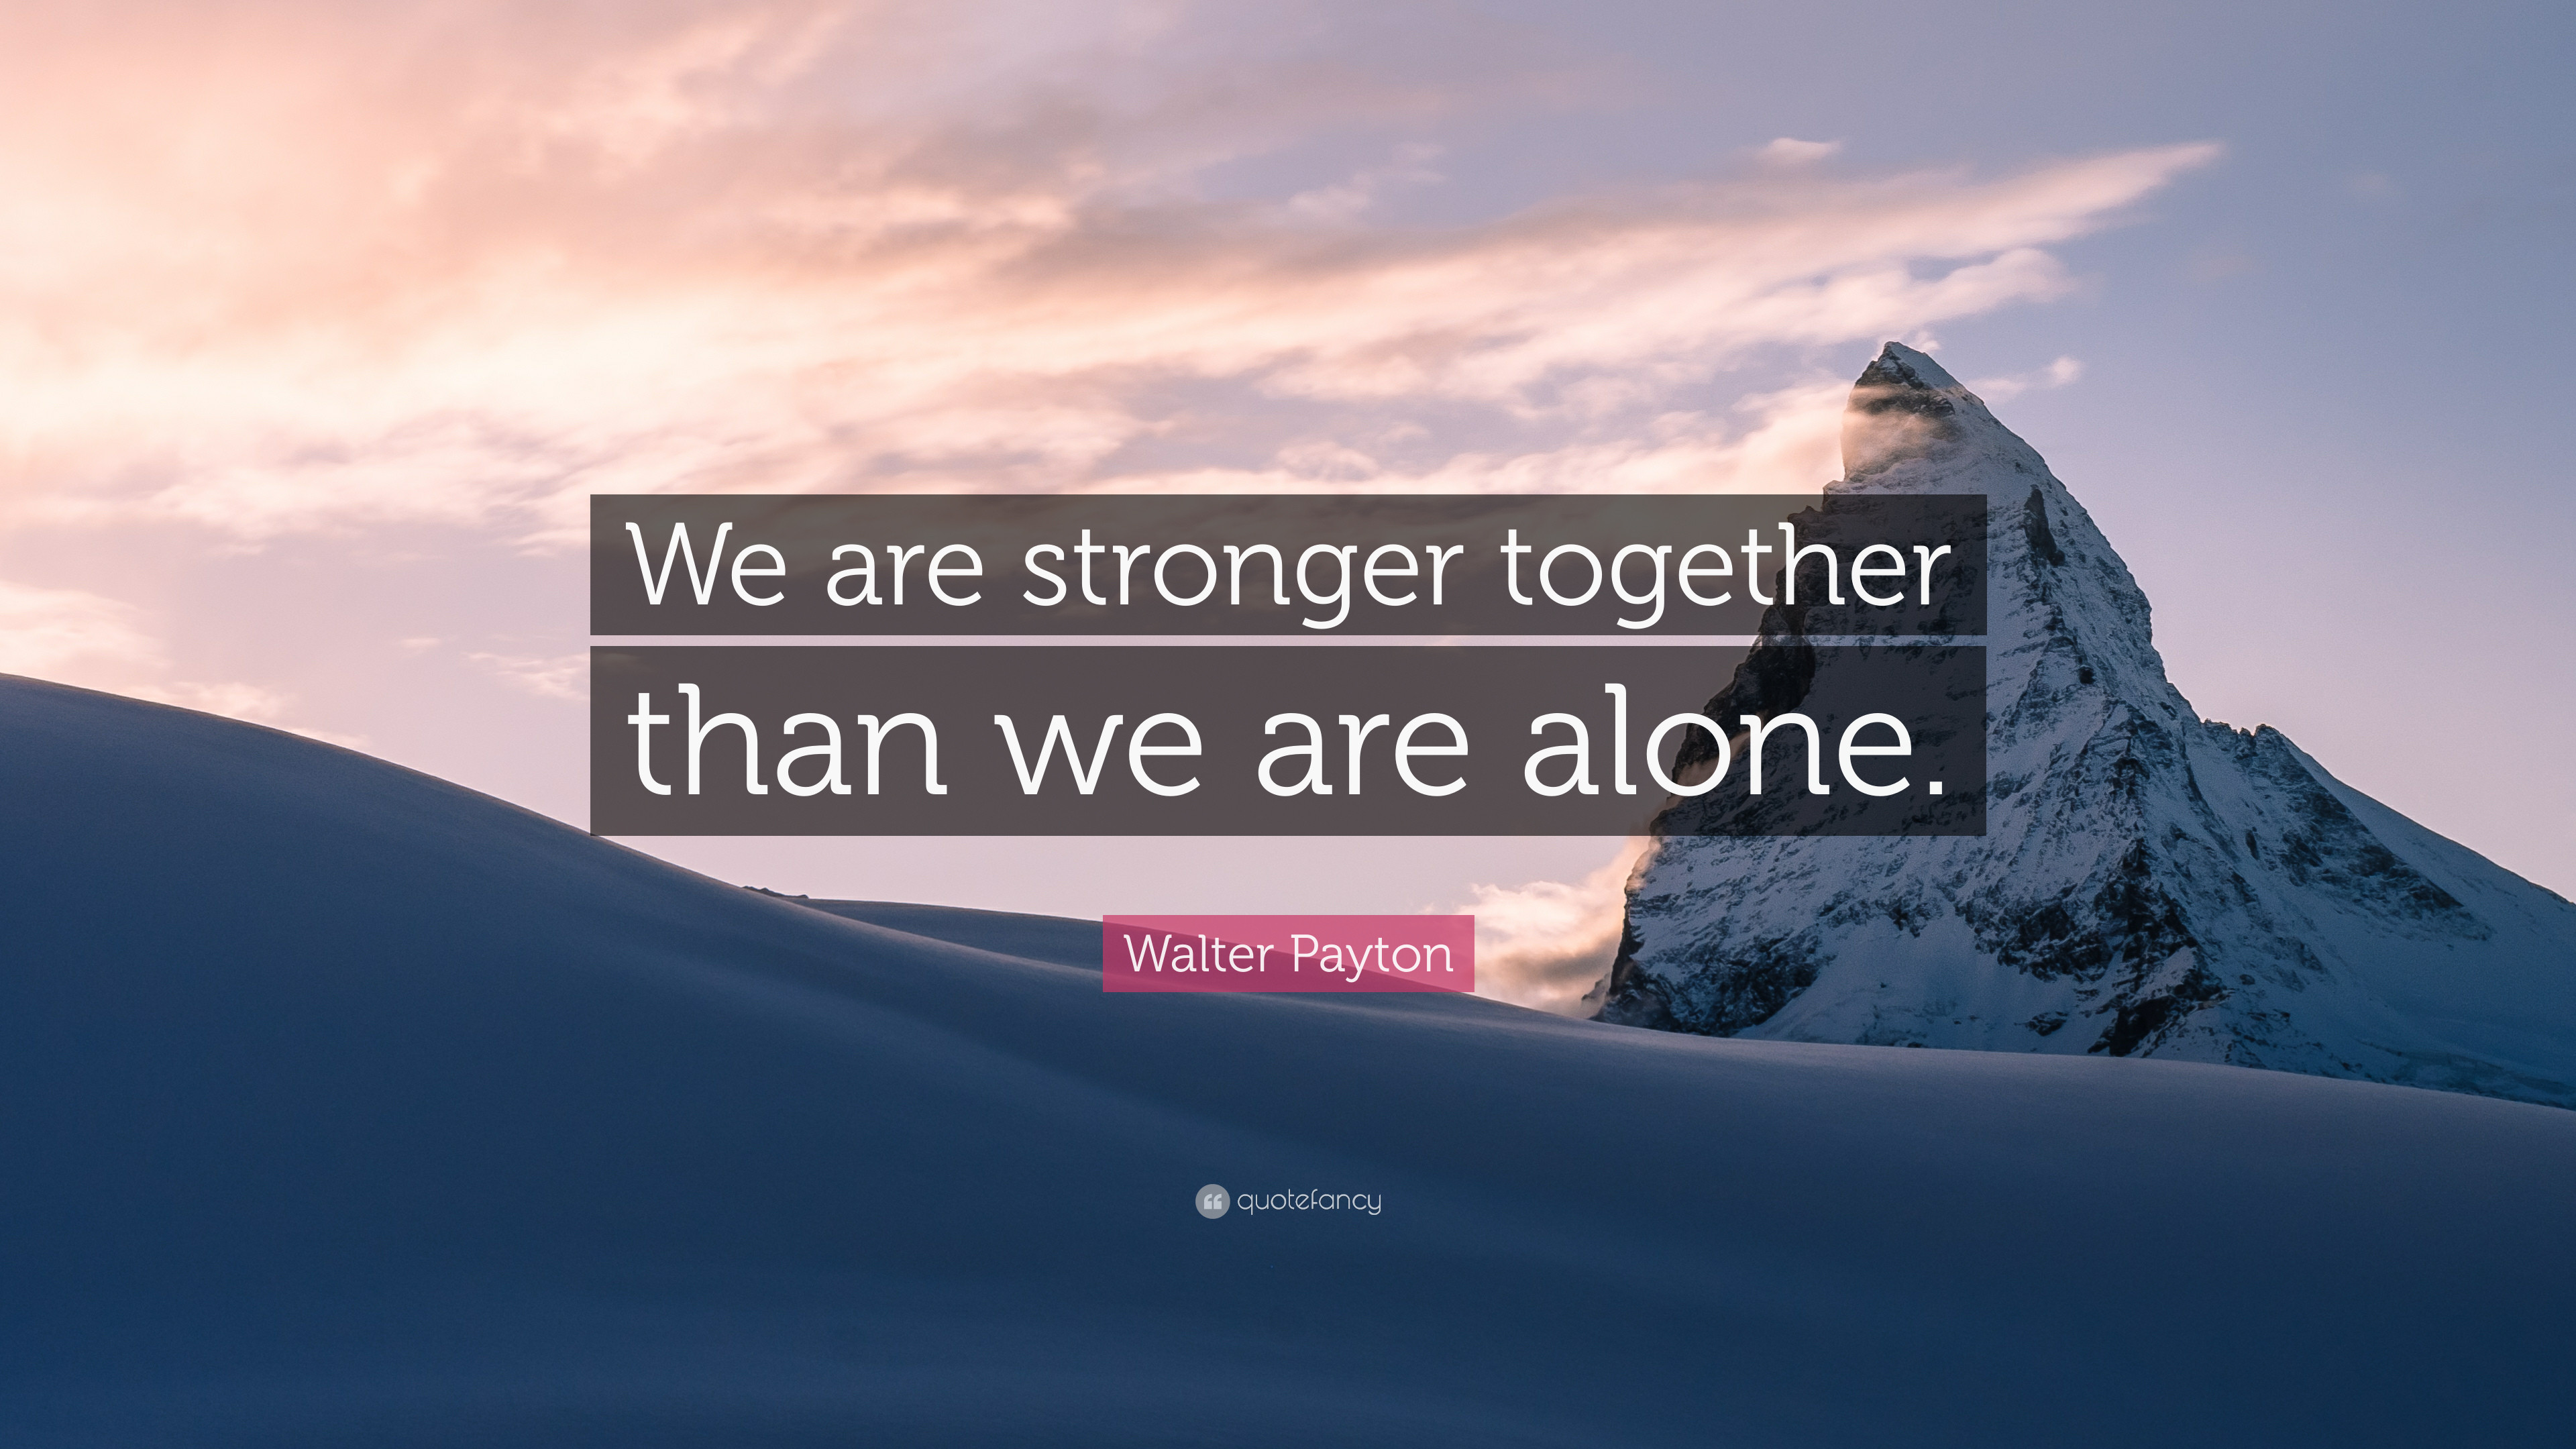 Walter Payton Quote: "We are stronger together than we are alone."...